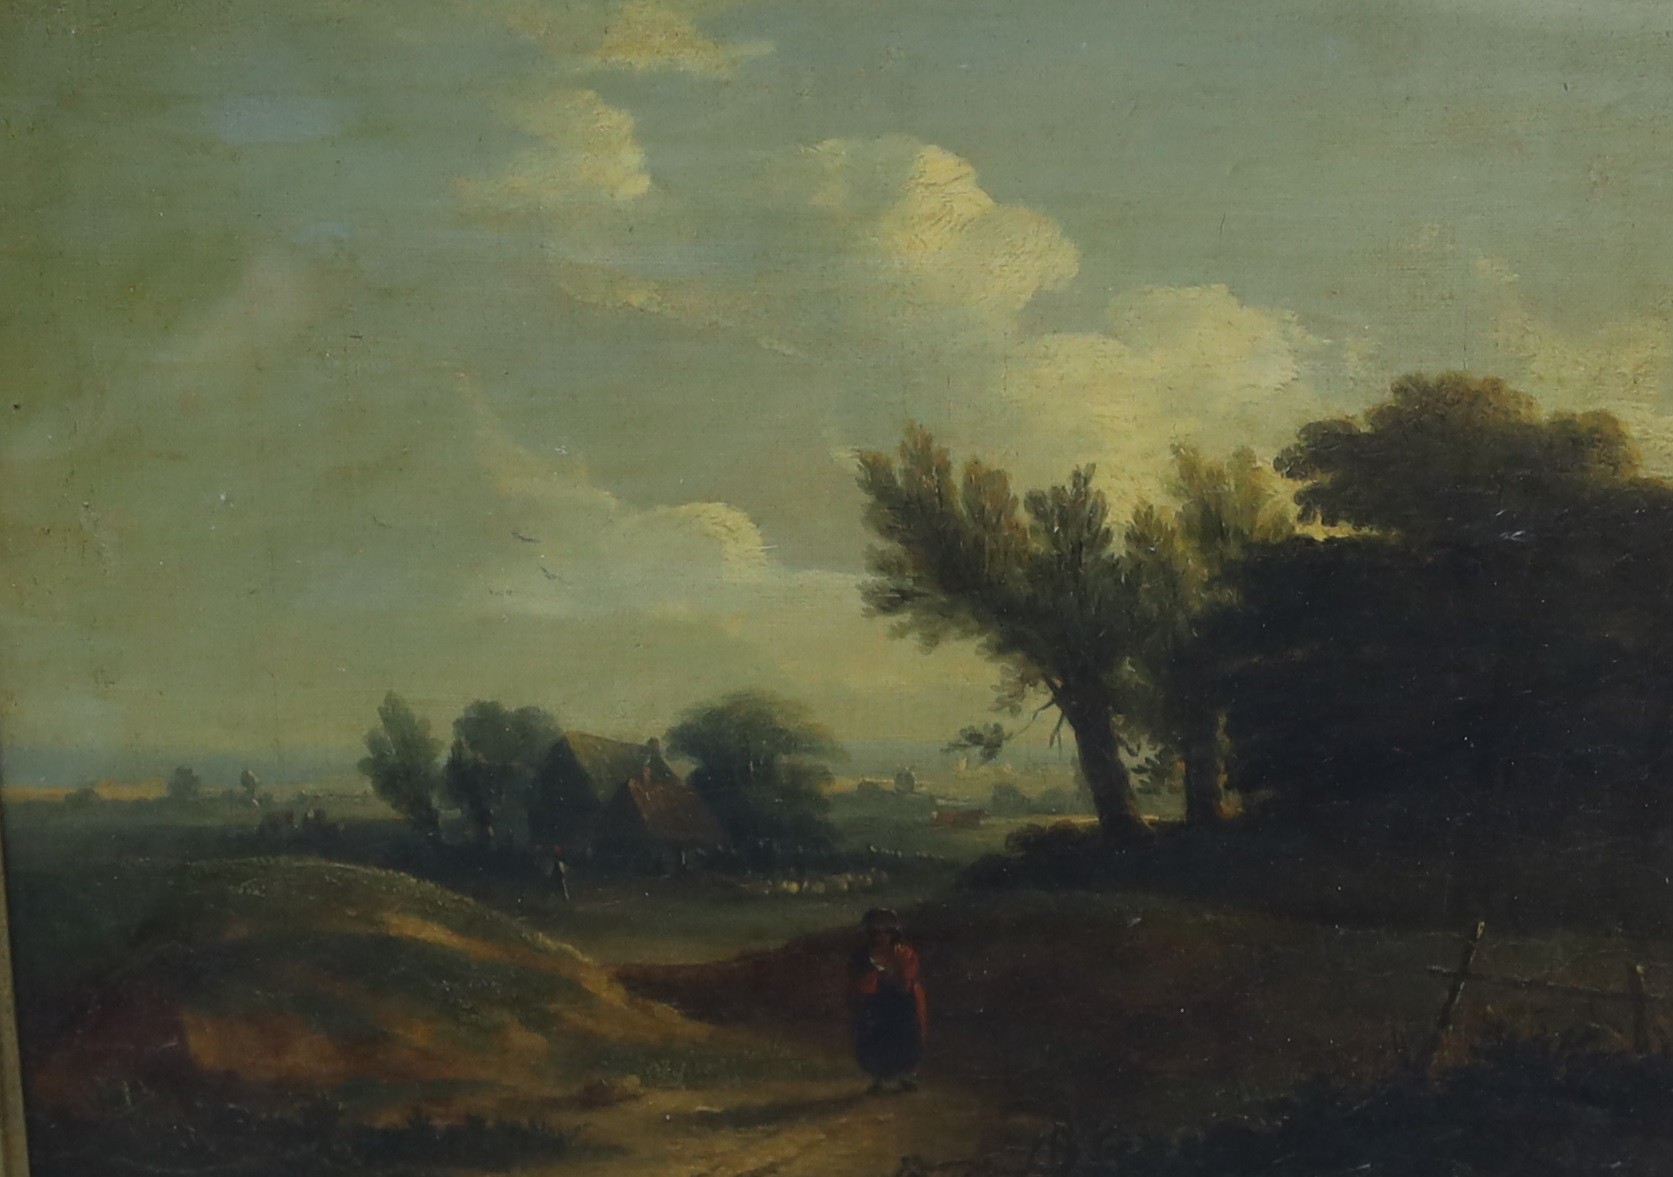 James Arthur O'Connor (1792-1841), oil on canvas laid on wooden panel, Traveller in an extensive landscape, signed, 26 x 31cm